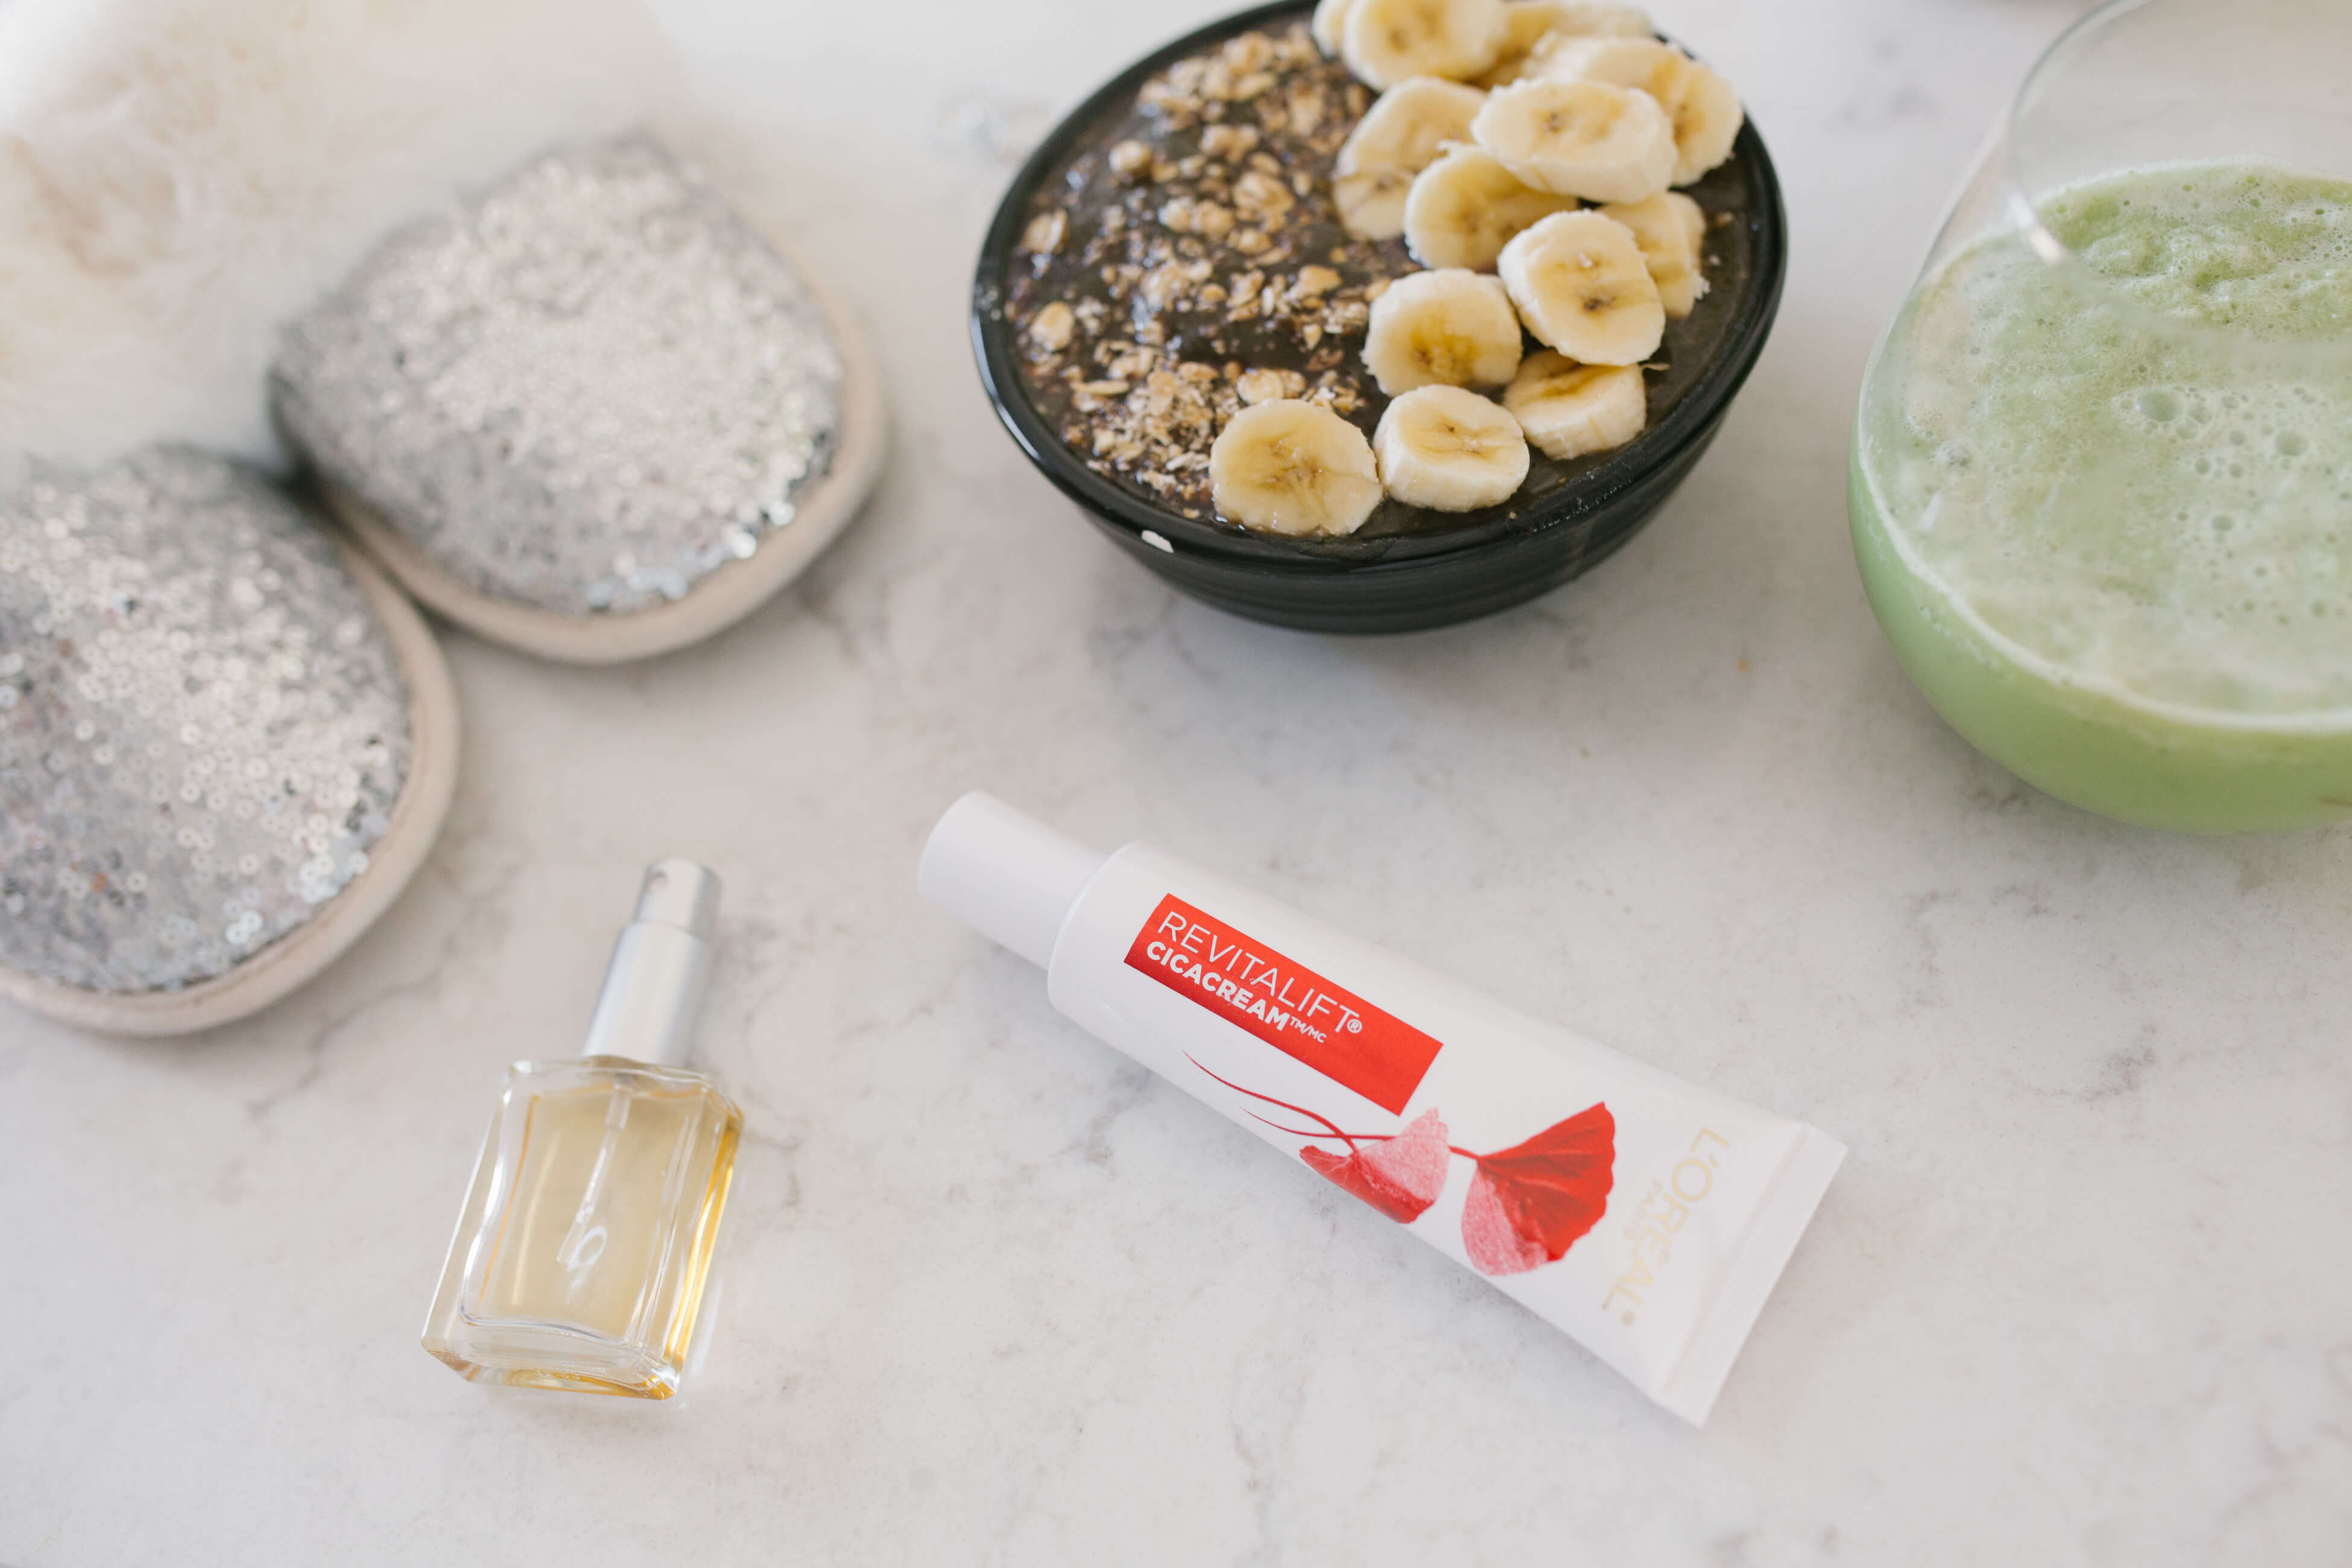 Review of L’Oreal’s Revitalift Cicacream; tips on staying active and eating healthy; mandy furnis sparkleshinylove